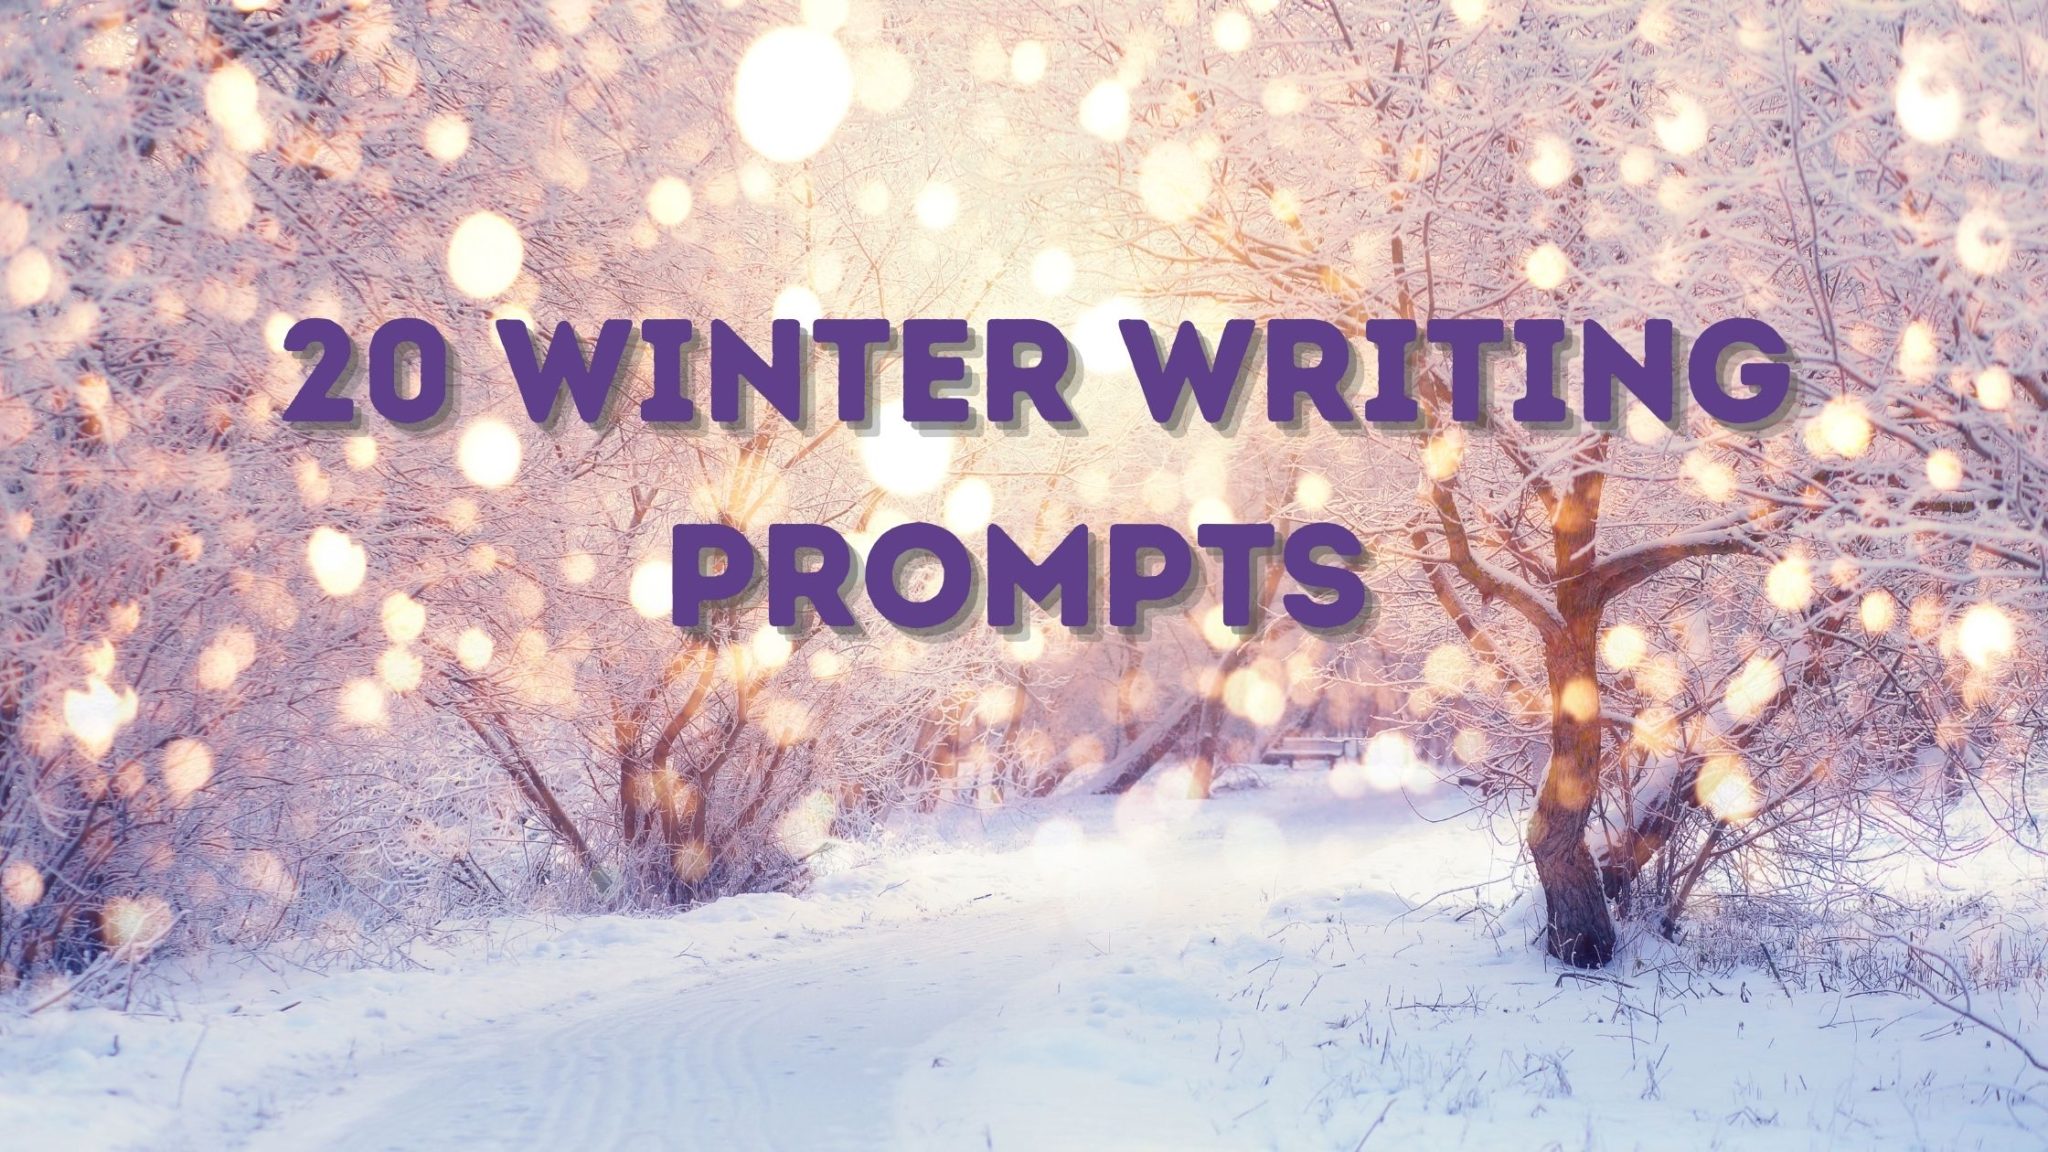 You are currently viewing 20 Winter Writing Prompts for Tweens